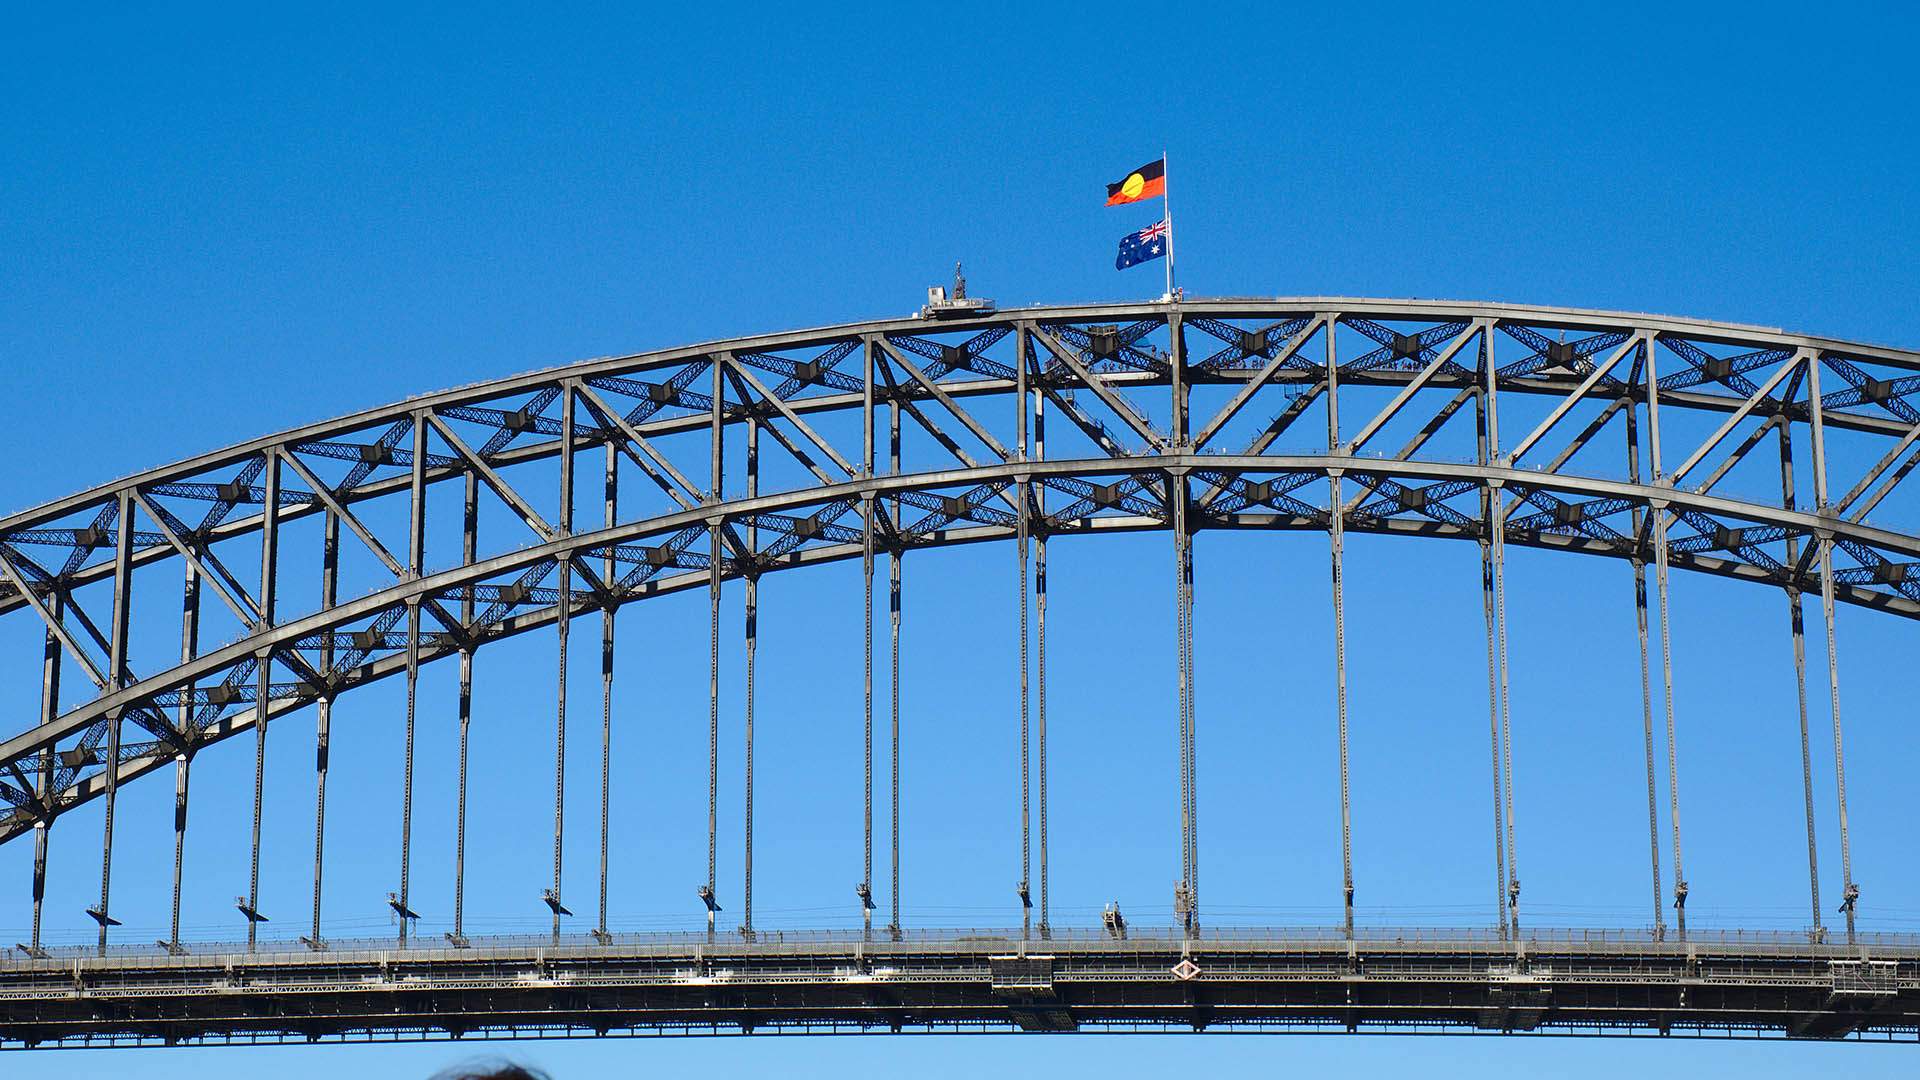 The Aboriginal Flag Is Set to Fly Permanently on the Sydney Harbour Bridge